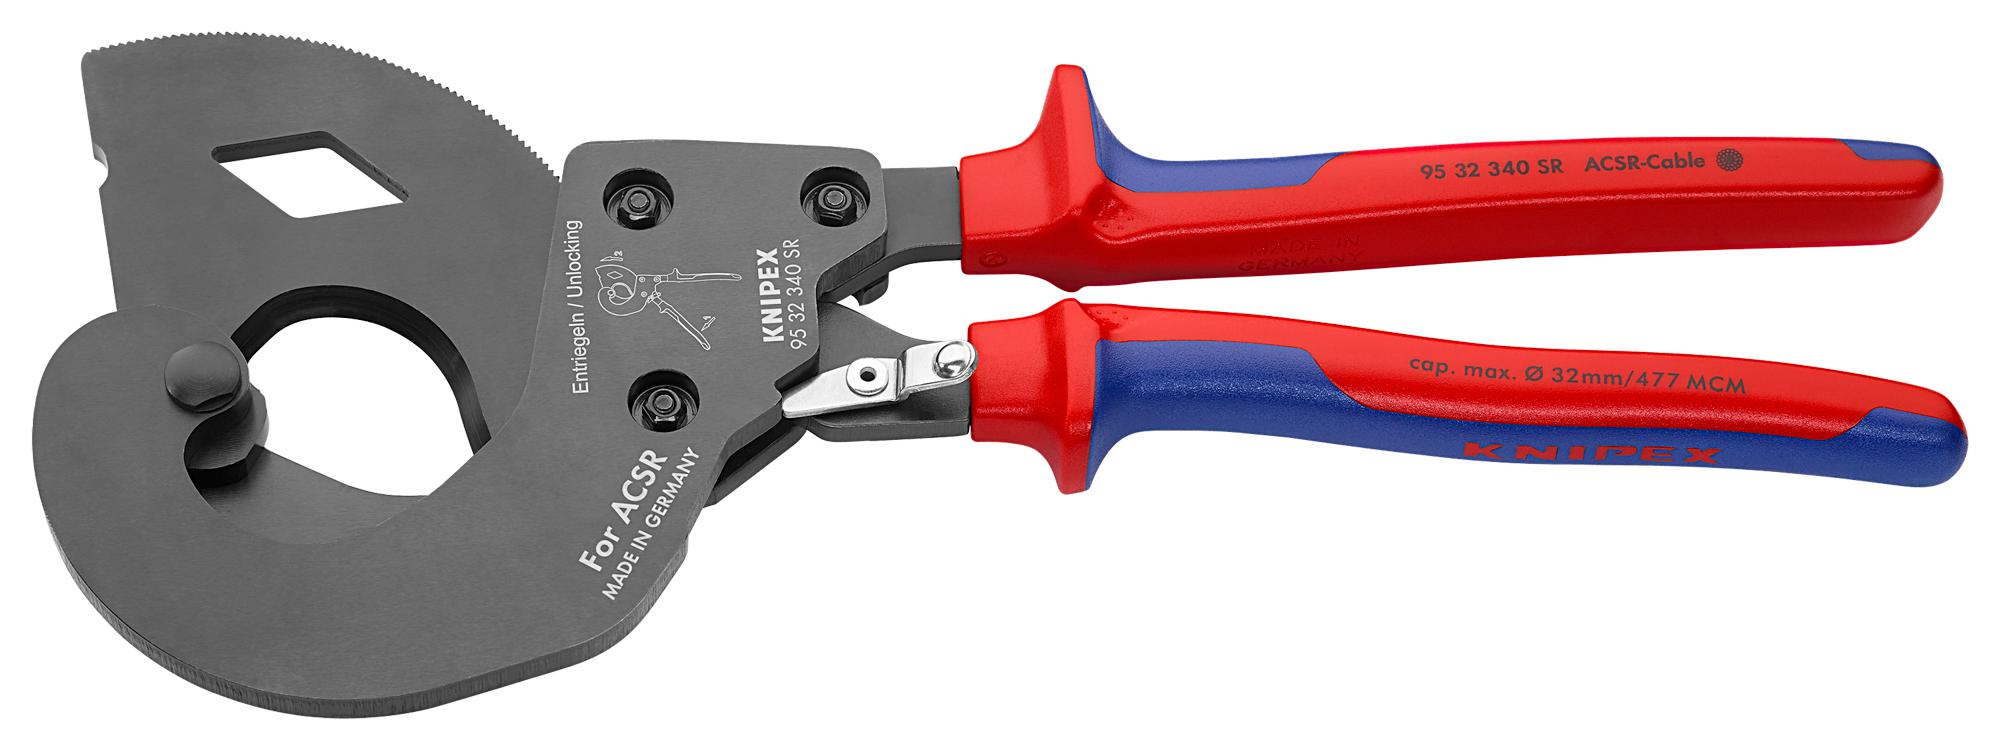 95 32 340 SR CABLE CUTTER, 32MM, 340MM KNIPEX